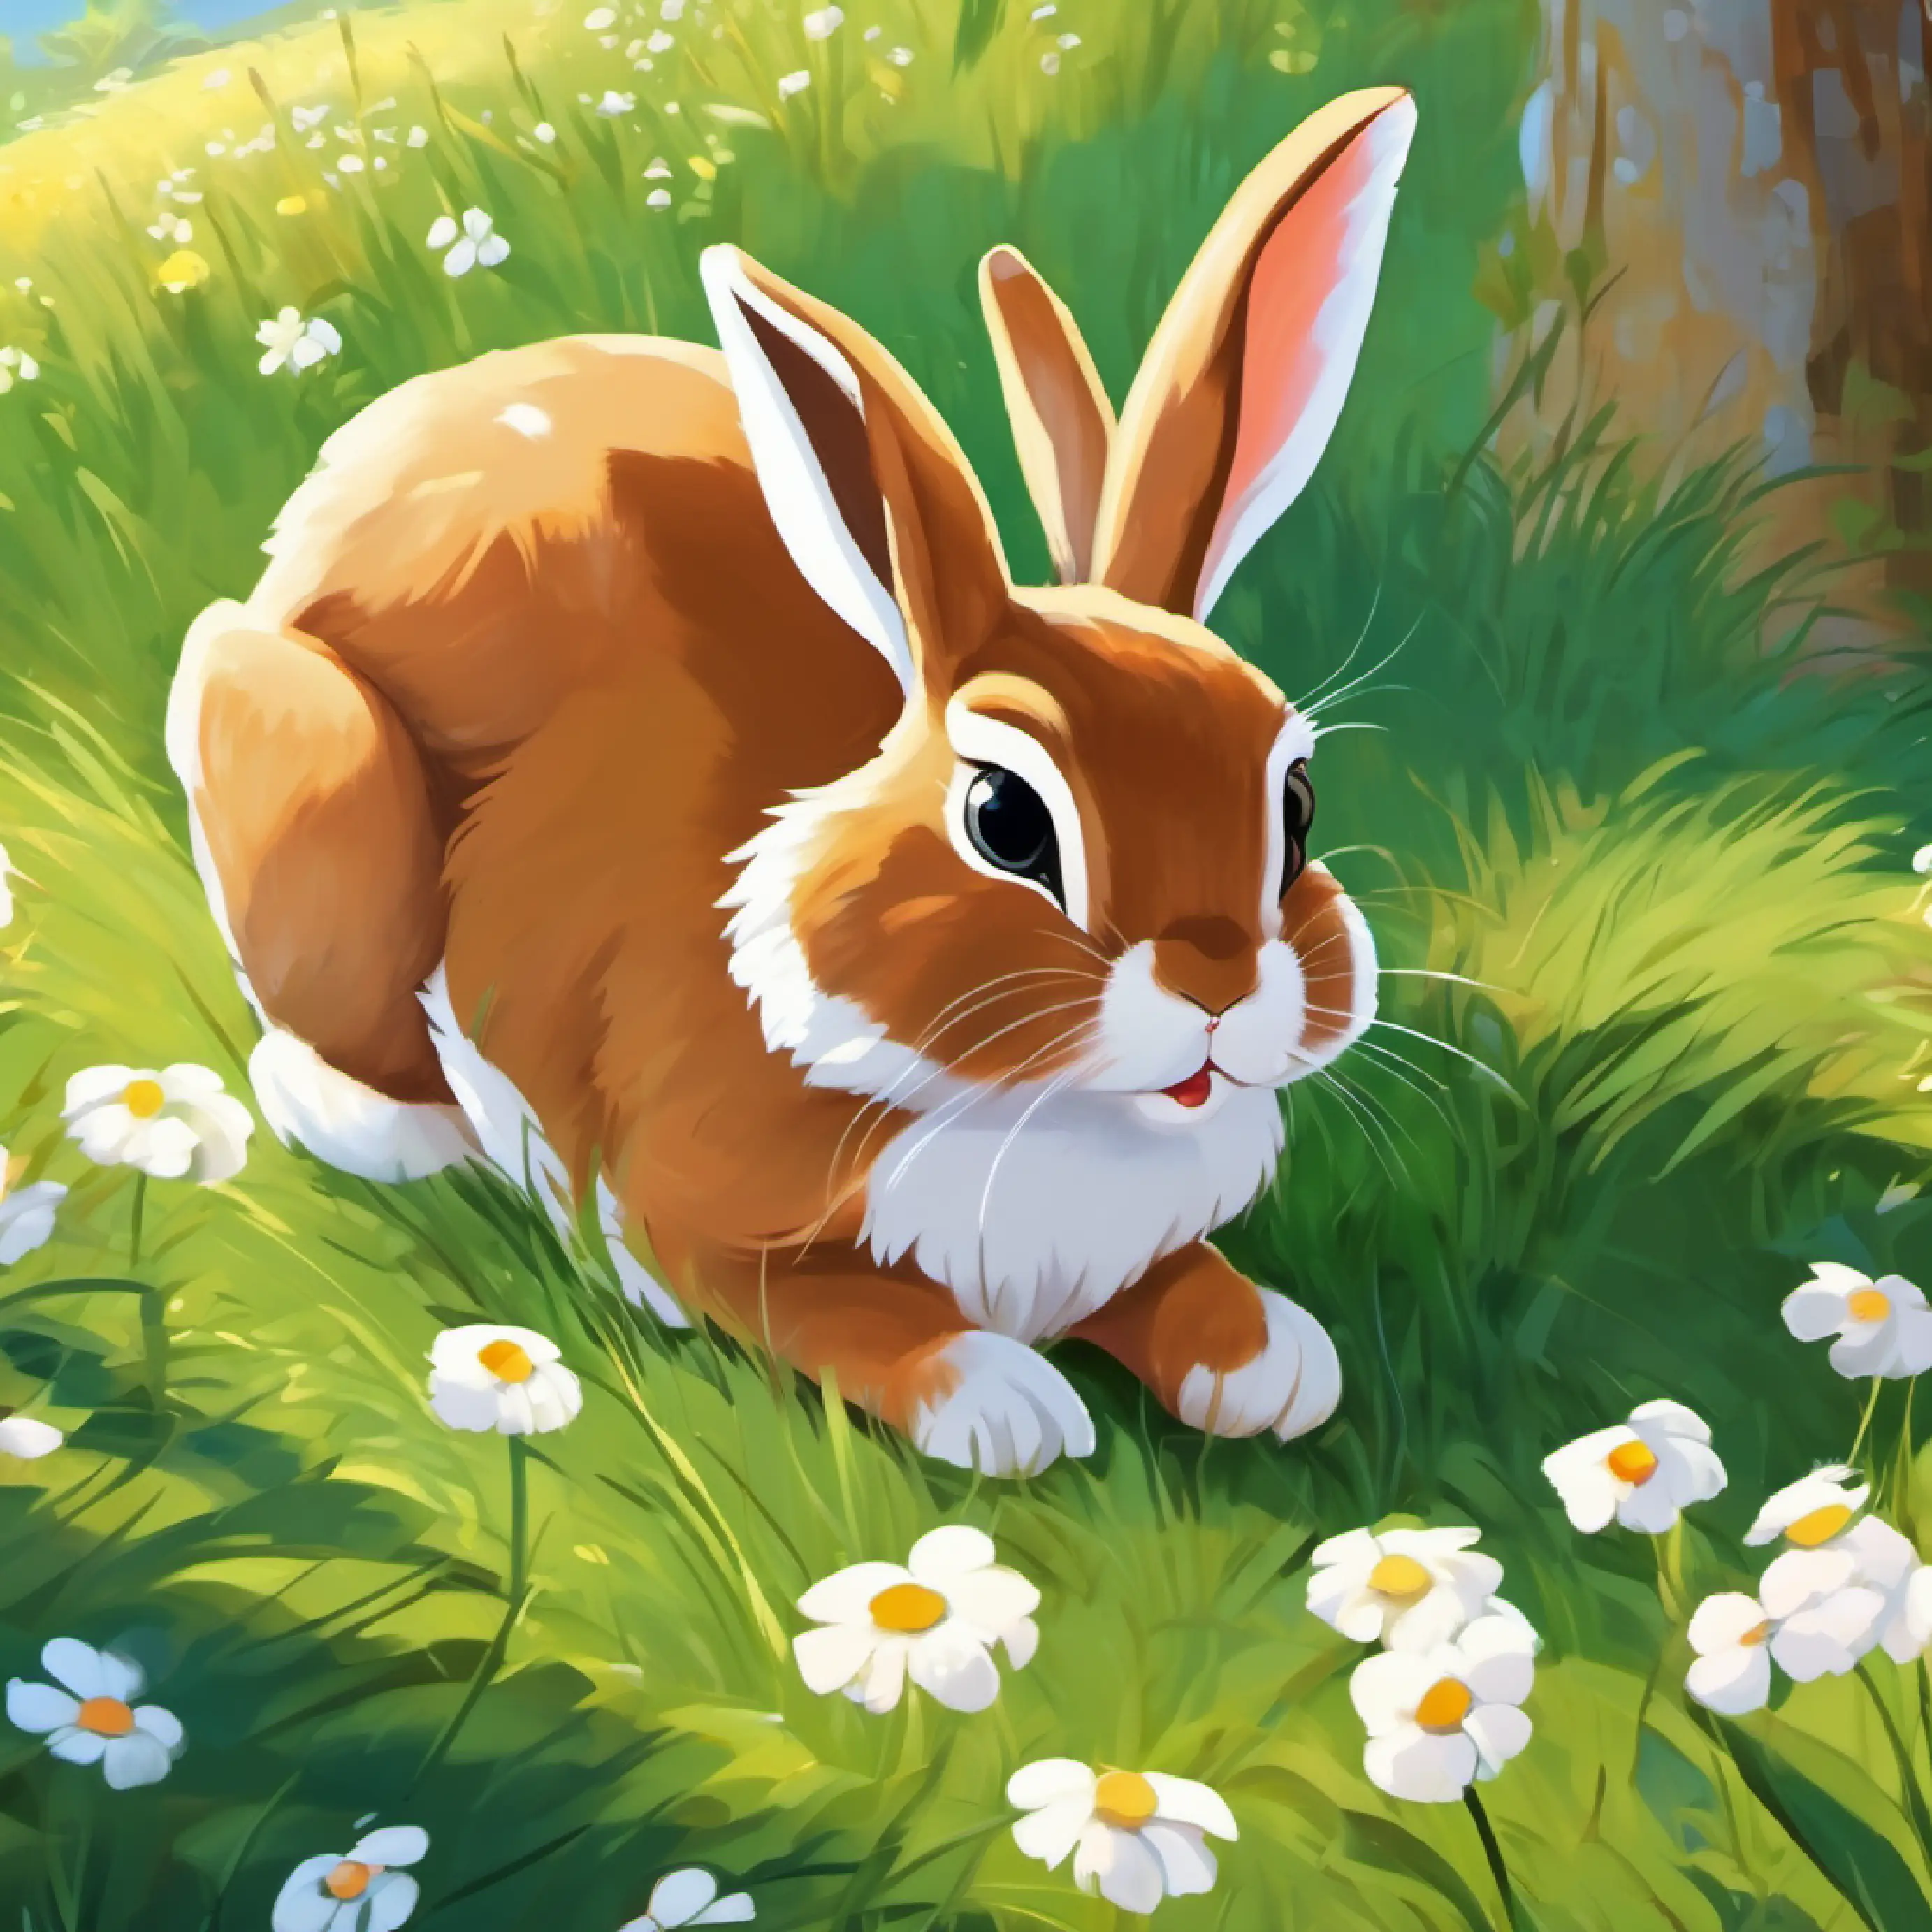 Introduces A brown rabbit  sad with white paws trying to relaz in the nature in a sunny day in spring